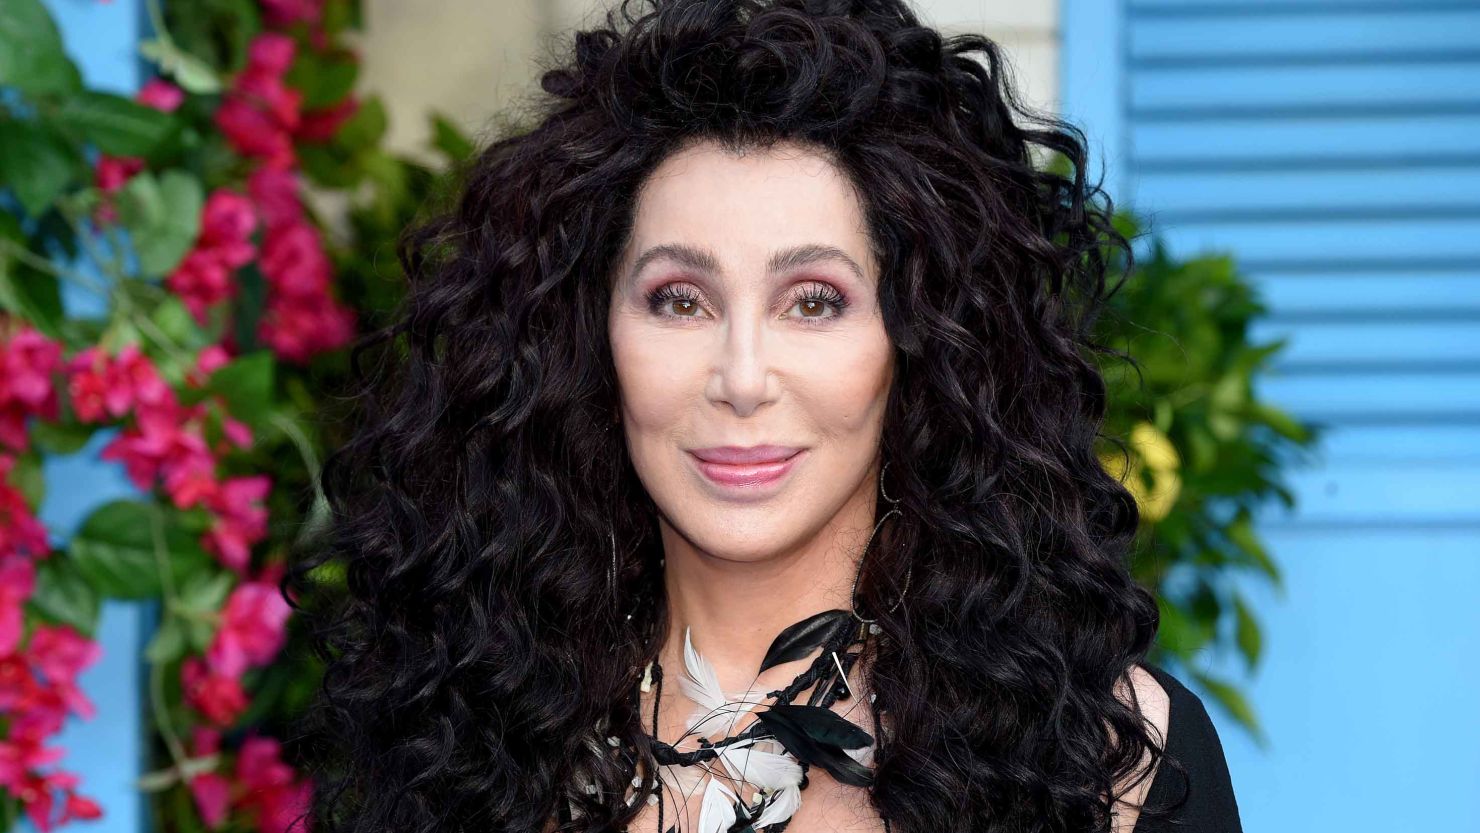 Cher poses on the red carpet upon arrival for the world premiere of the film "Mamma Mia! Here We Go Again" in London on July 16, 2018. (Photo by Anthony HARVEY / AFP)        (Photo credit should read ANTHONY HARVEY/AFP/Getty Images)